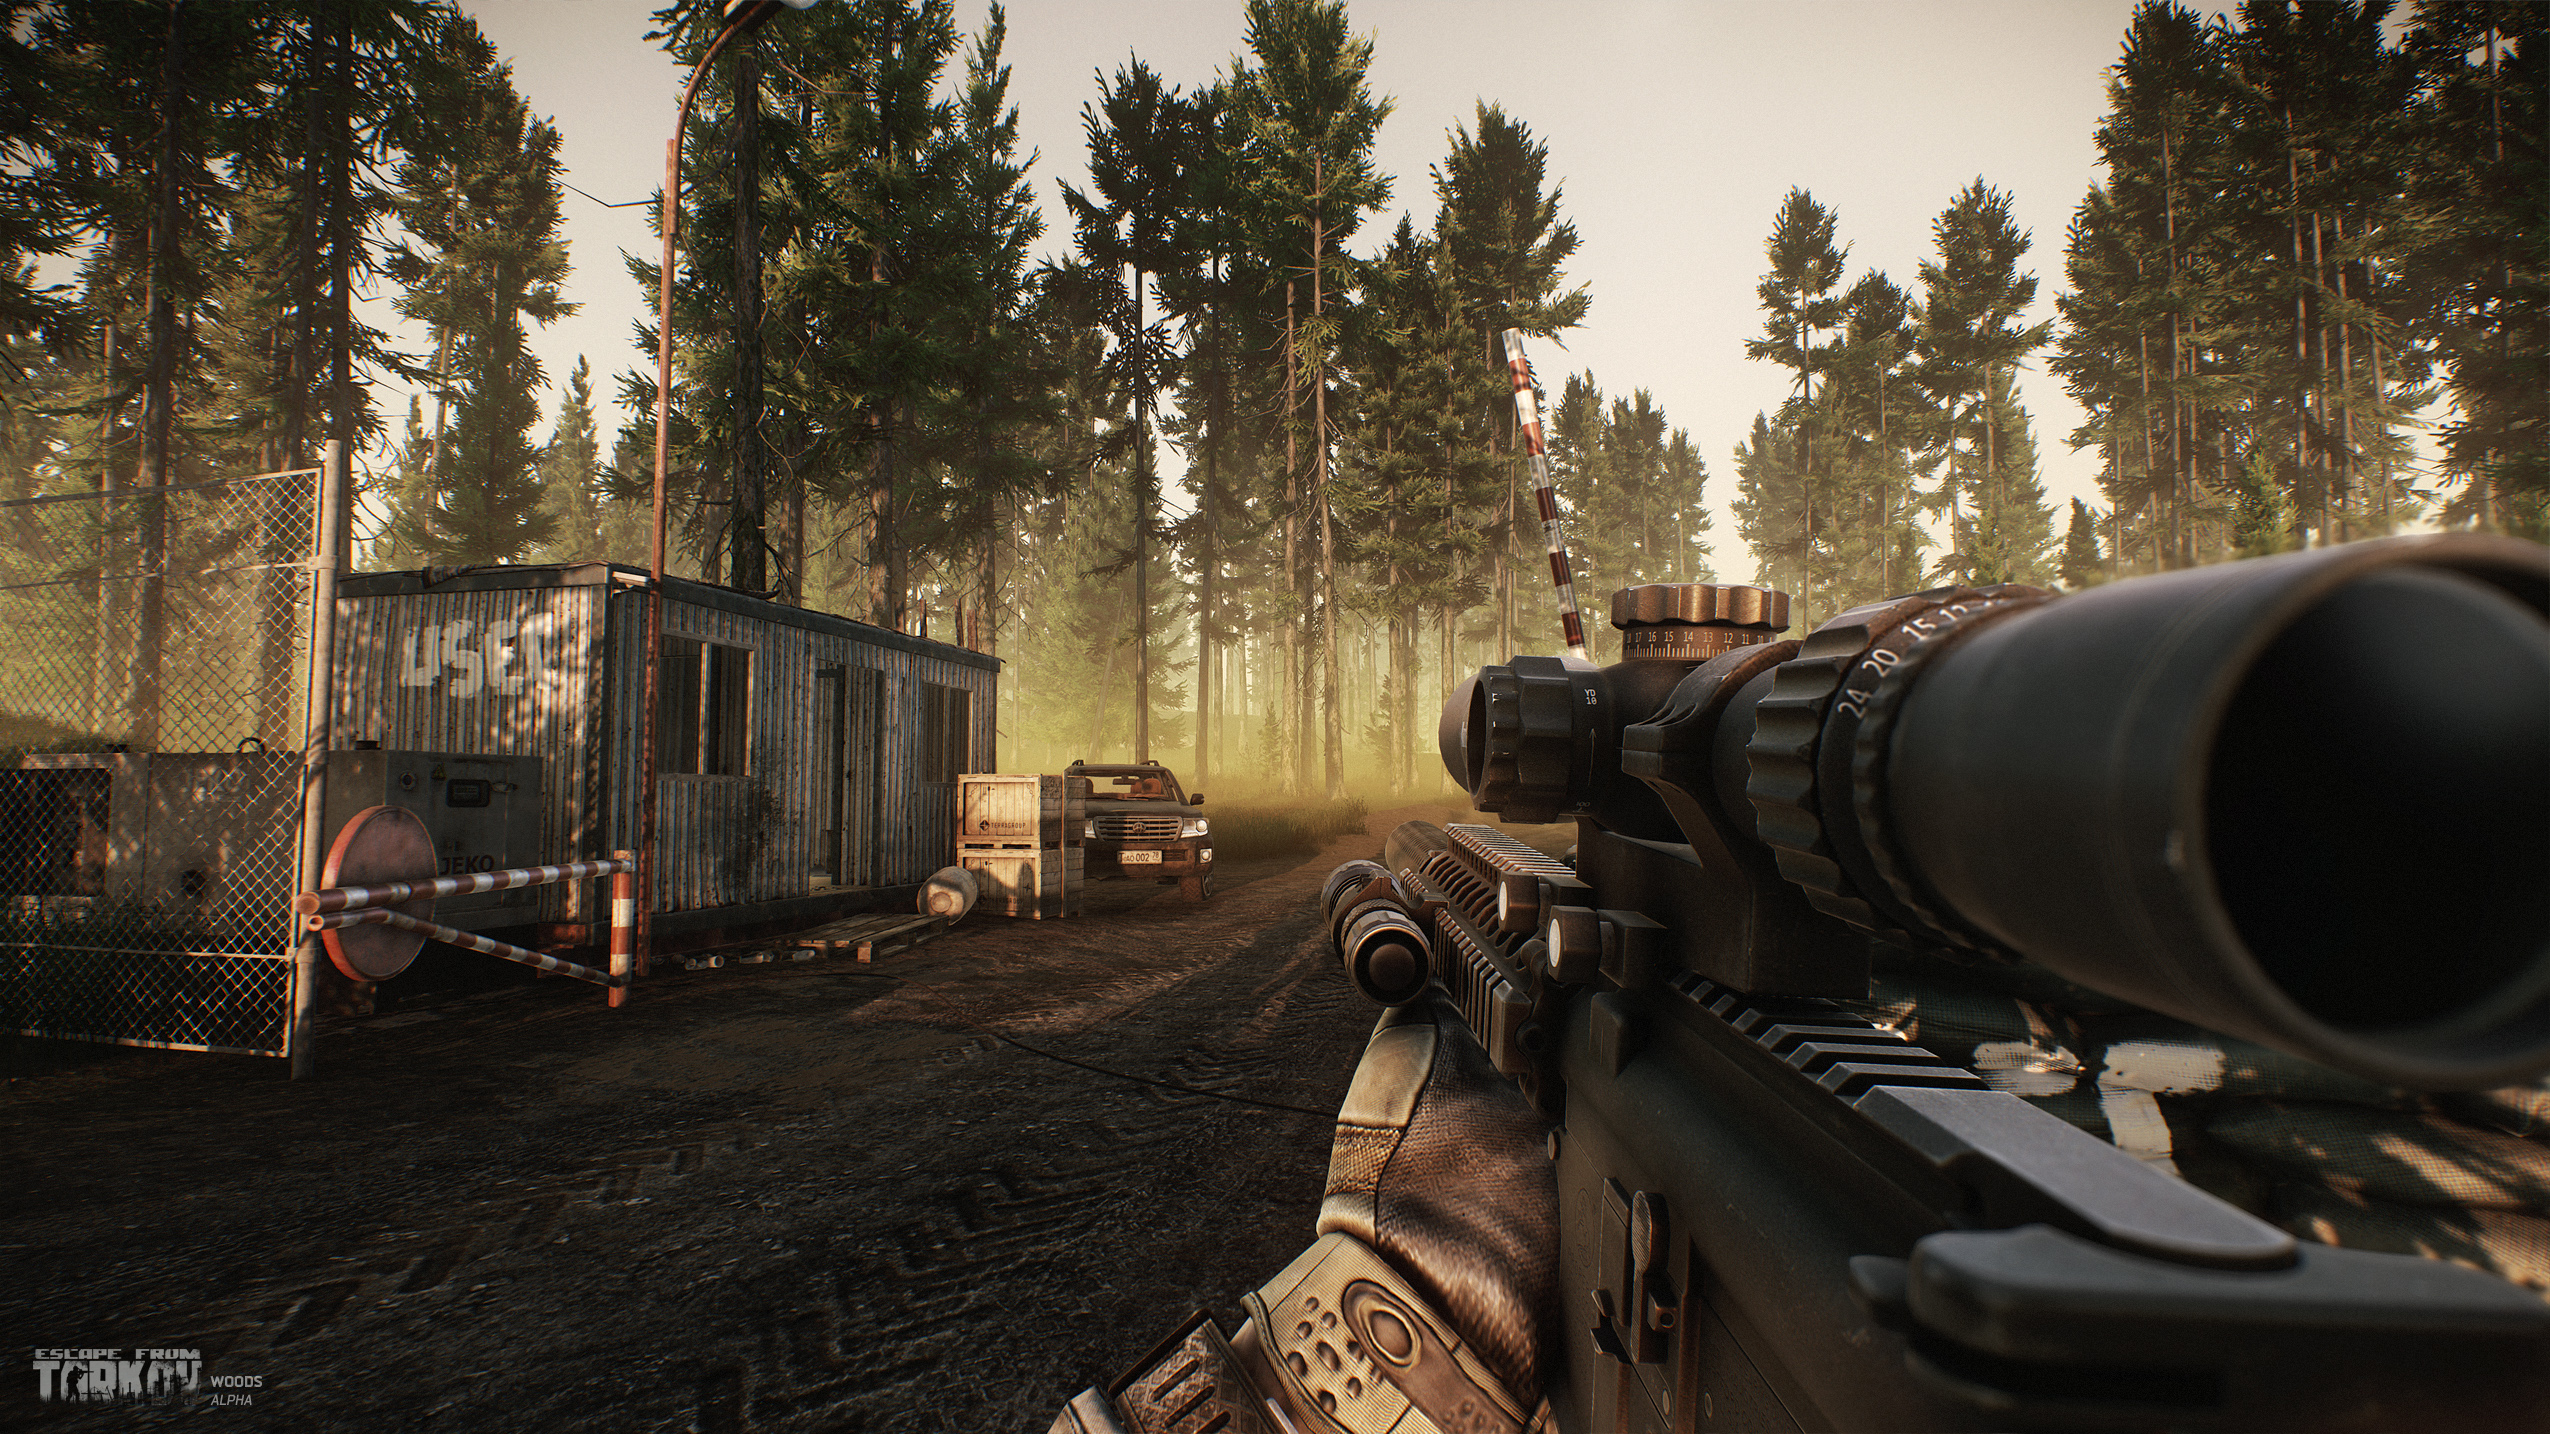 Escape from  Tarkov, Videojuegos, Video games, War Game, Tactical Game, Mmorpg, First person shooter Wallpaper